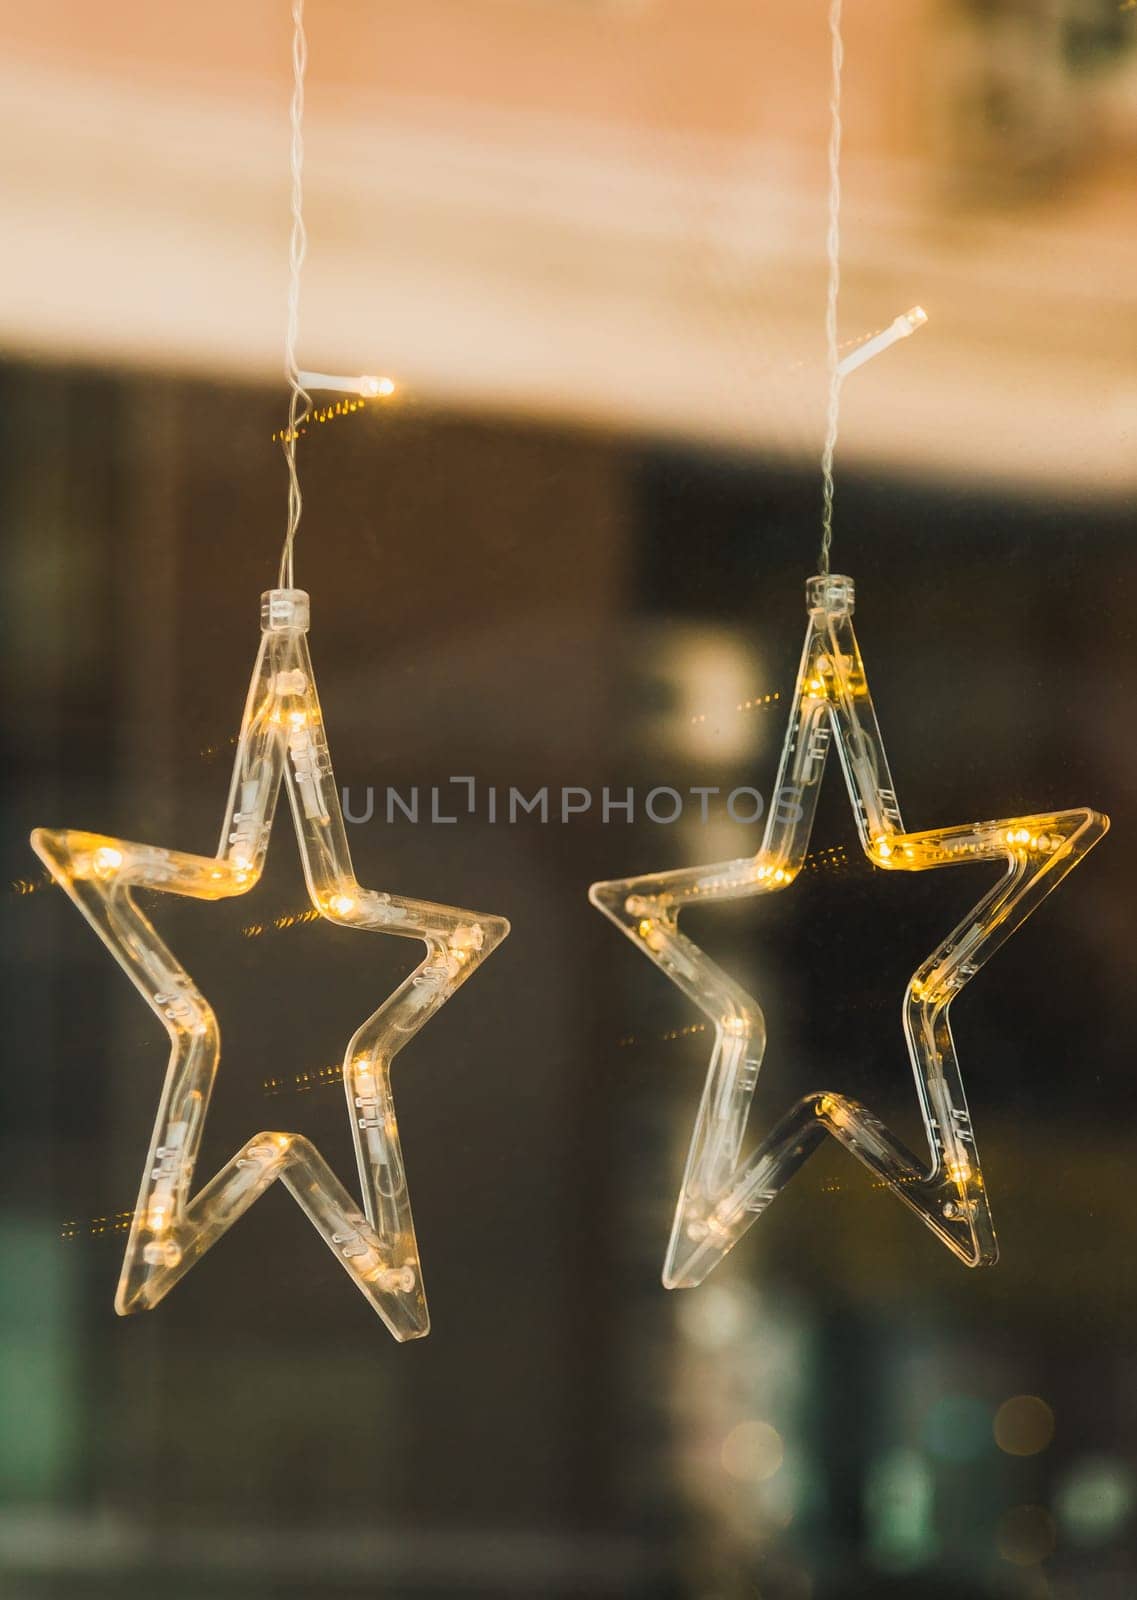 Decor star for lightning and decoration during winter time for Christmas store or window shops in winter holidays city street - celebration and festive